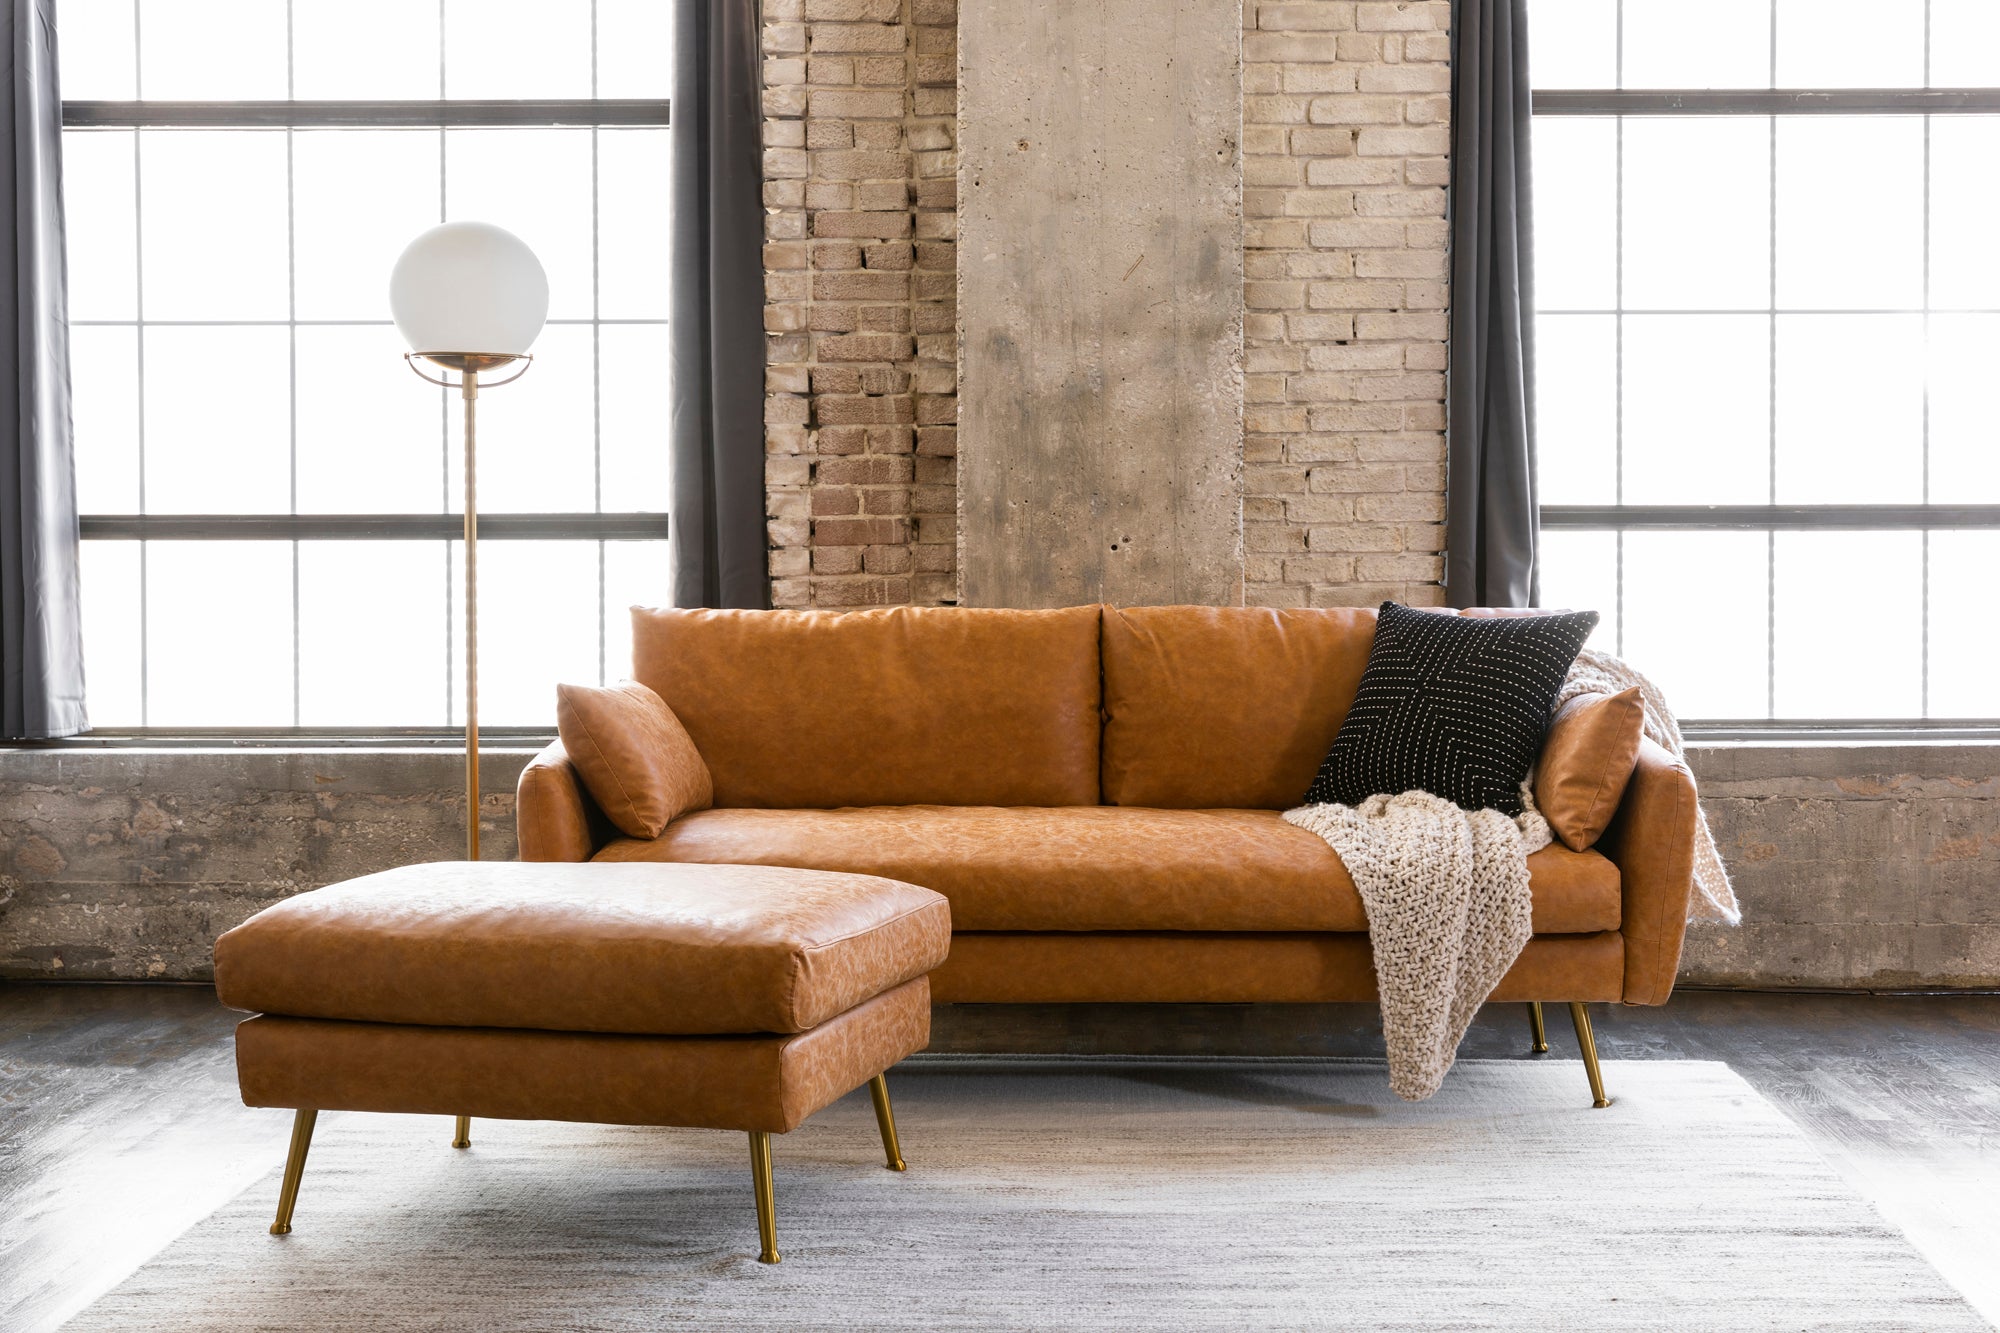 Albany Park Mid-Century Modern Couch - Cozy Designer Sofa Distressed Vegan Leather / Gold